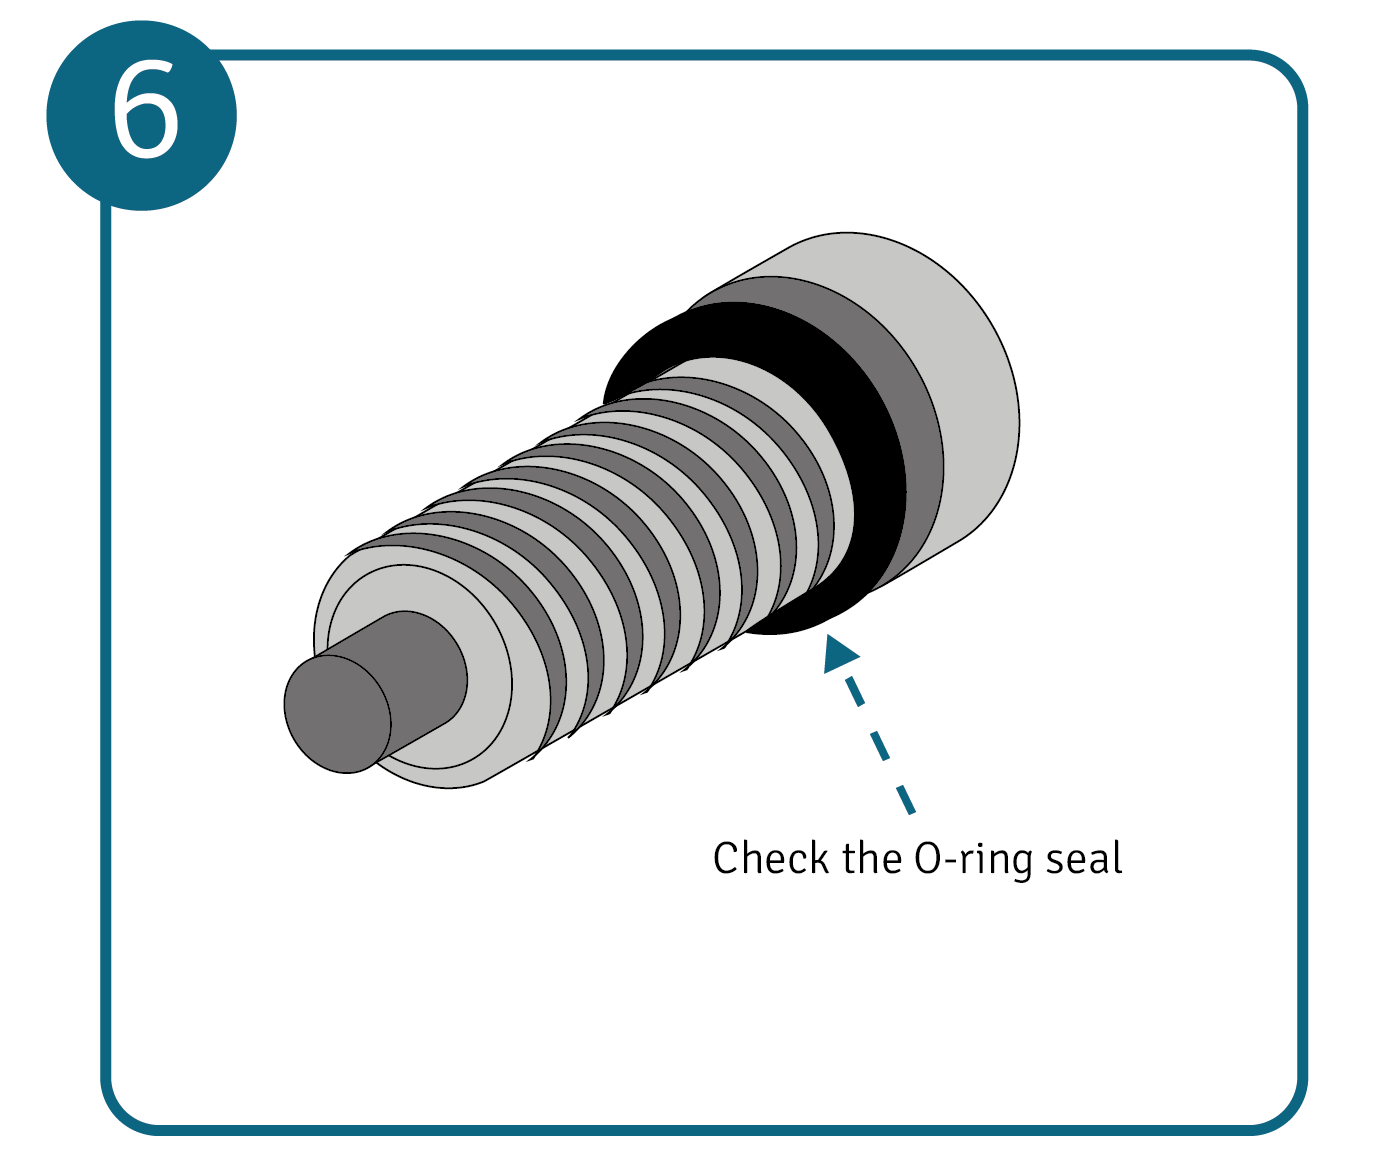 Ensure the O-ring is correctly positioned on the screw